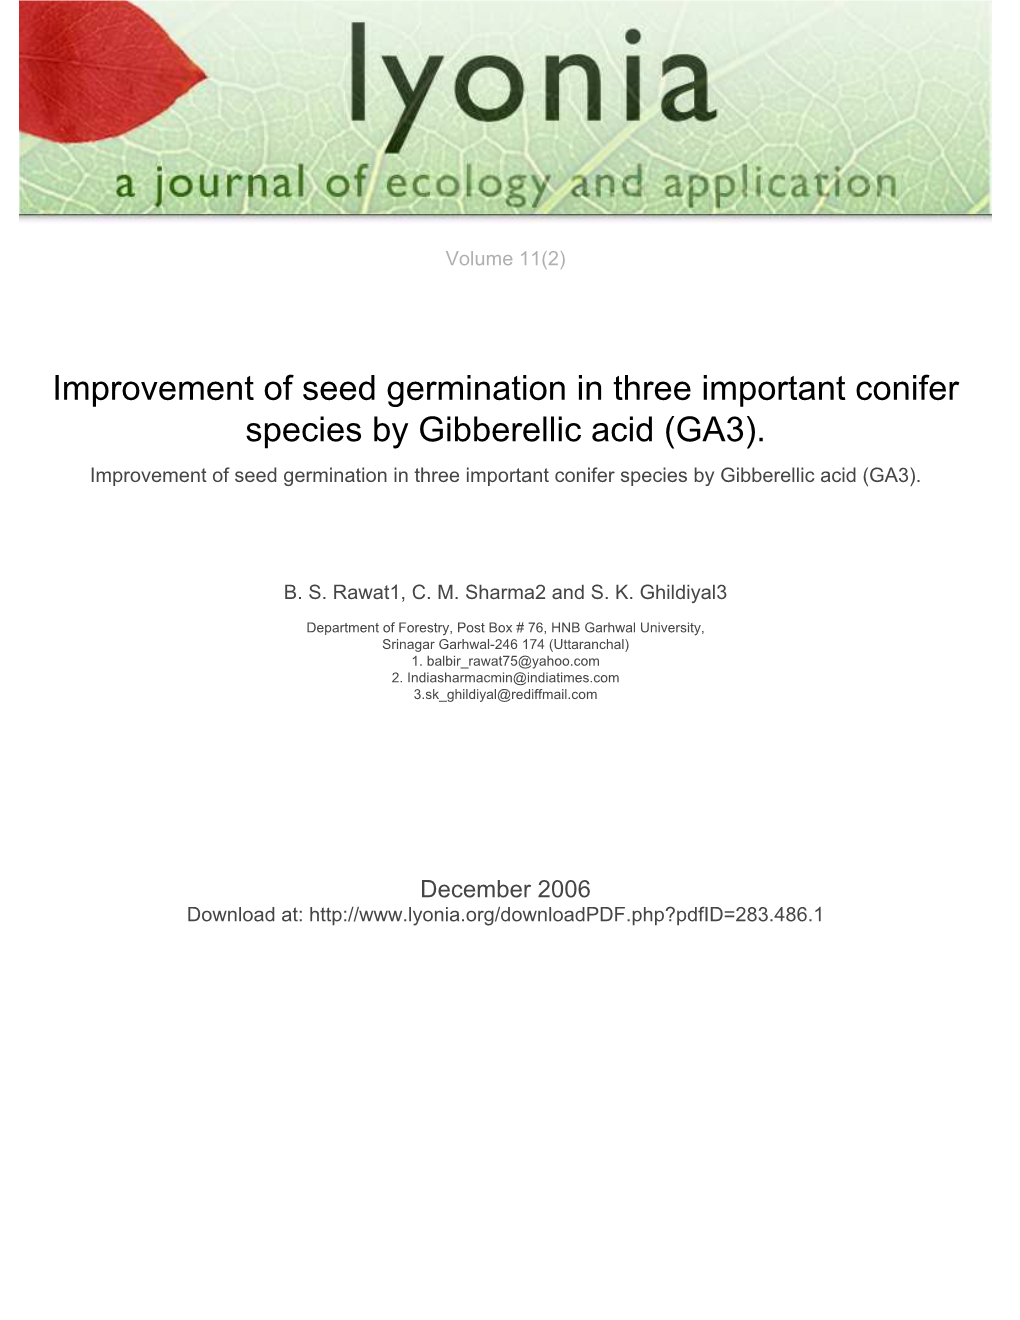 Improvement of Seed Germination in Three Important Conifer Species by Gibberellic Acid (GA3)